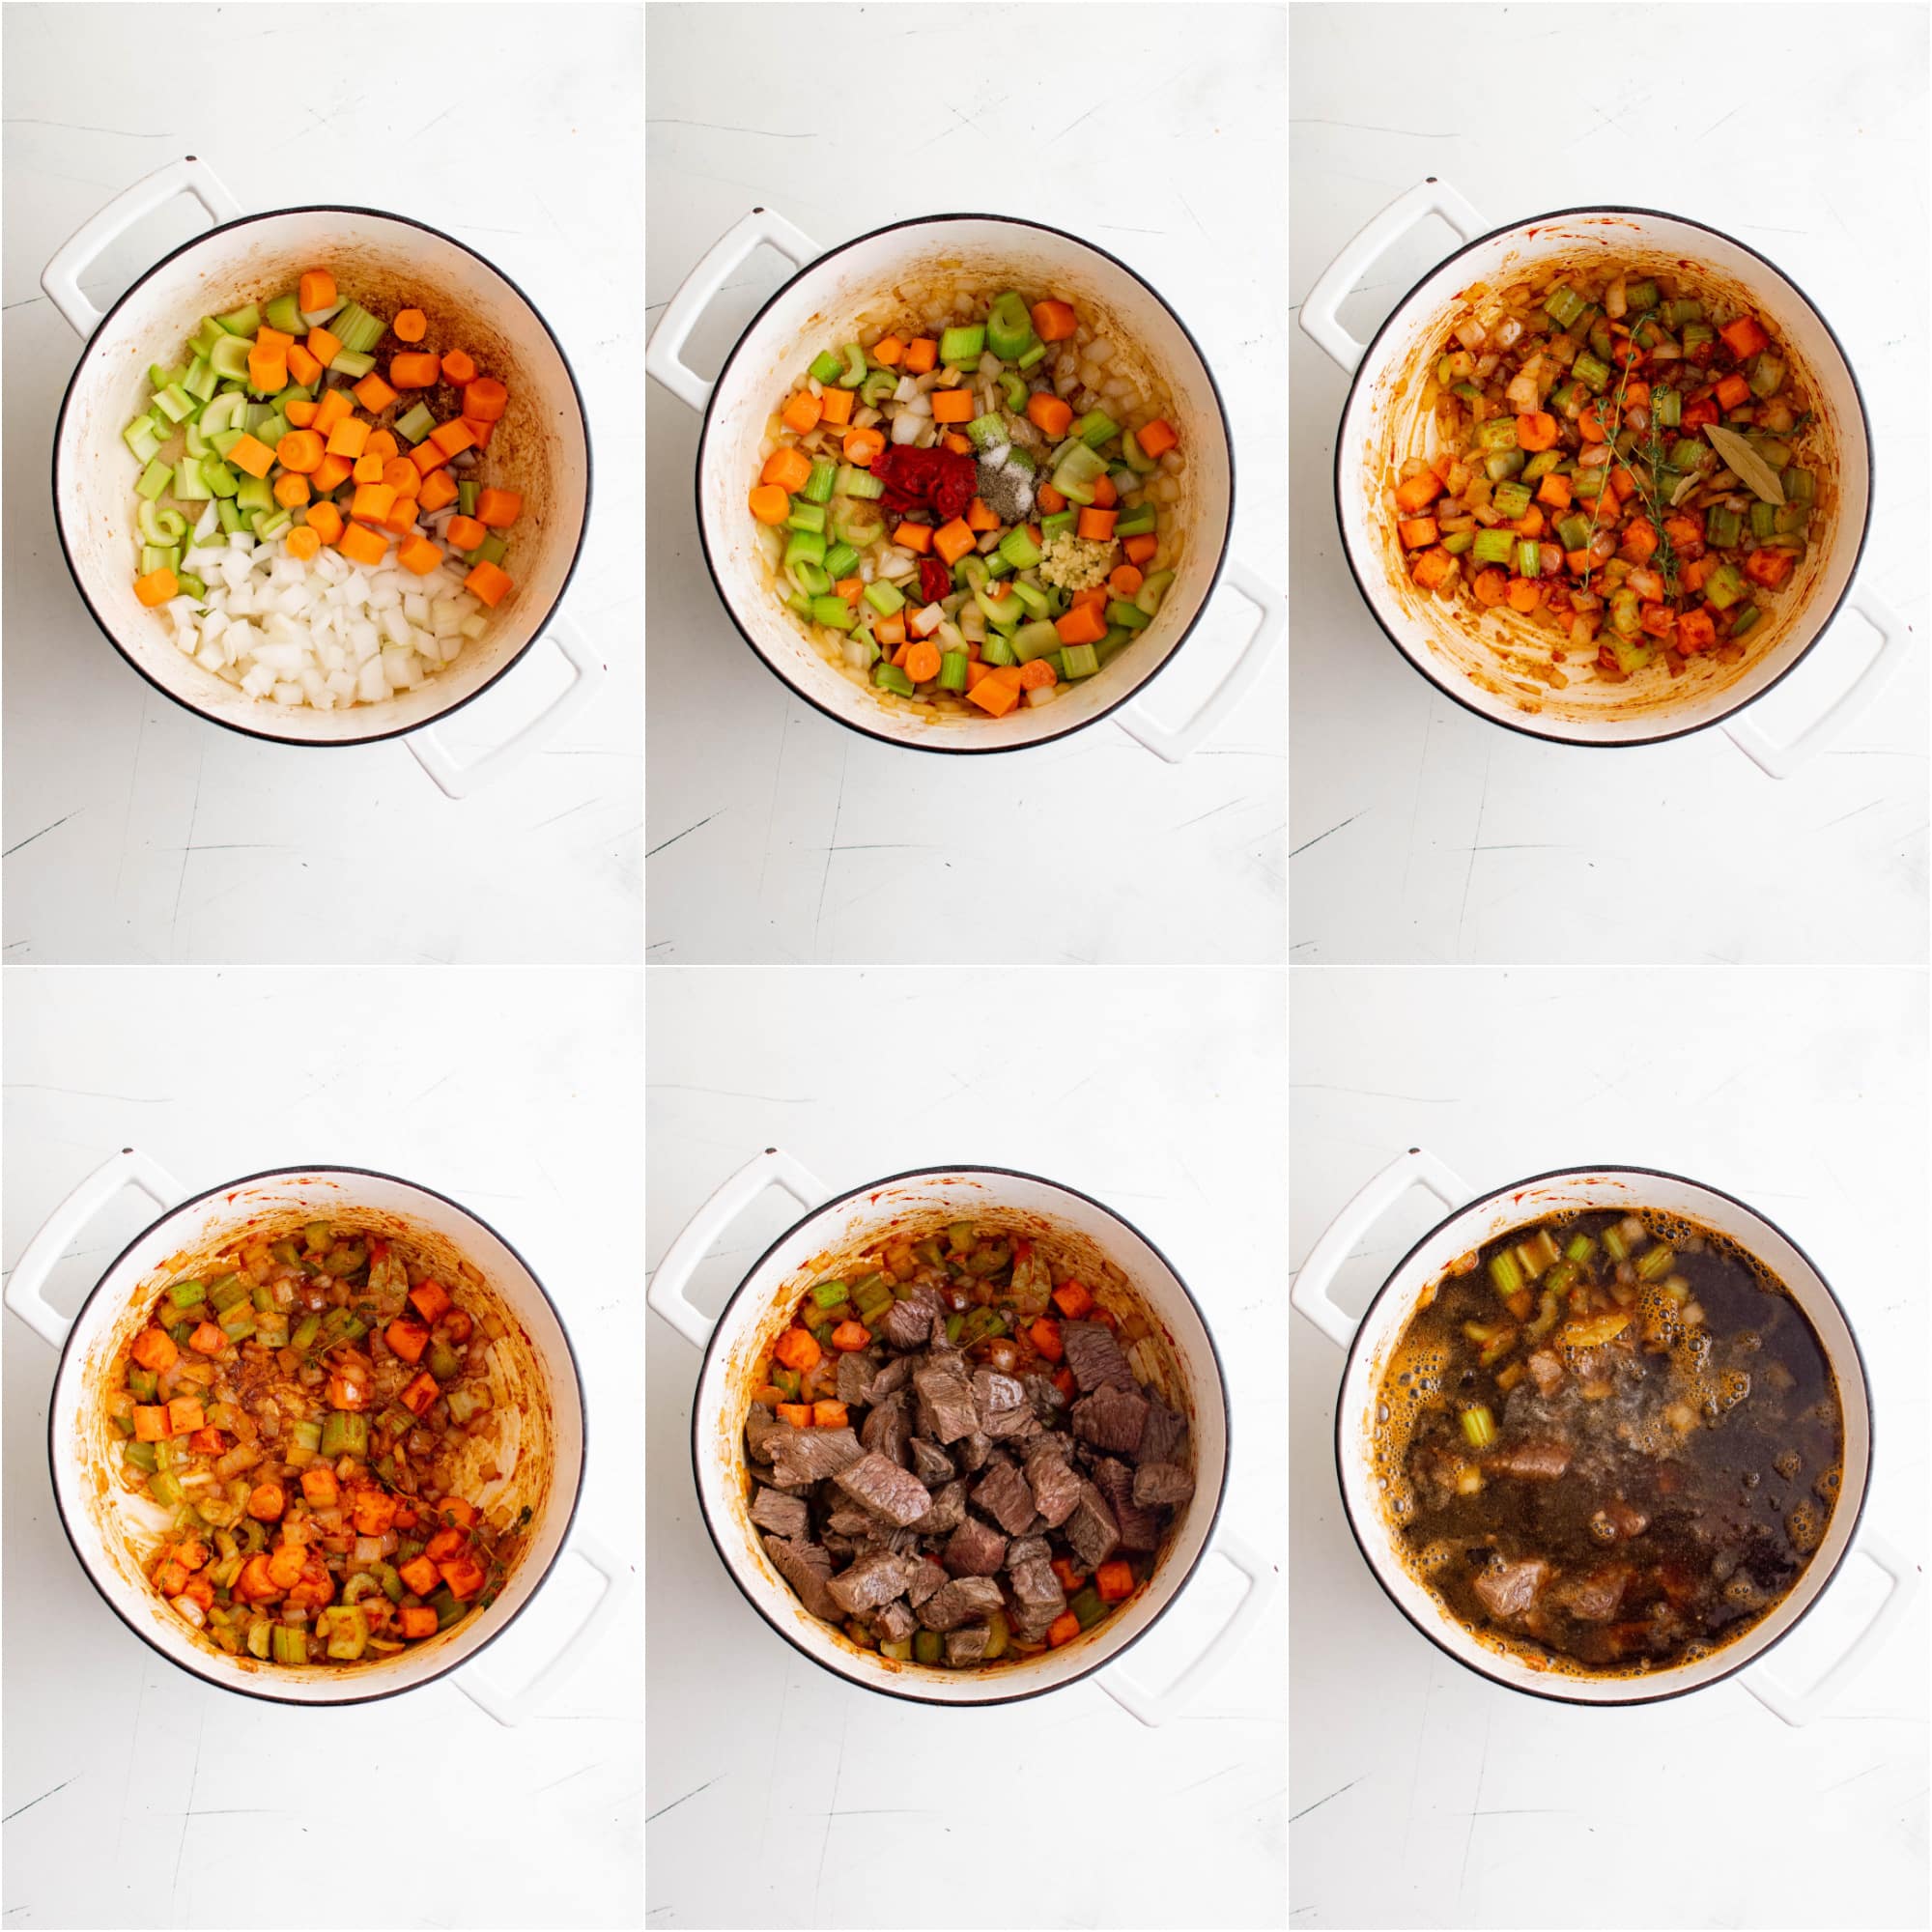 Six images in a collage showing how to make Guinness beef stew including softening vegetables, combining the vegetables with tomato paste and spices, returning the browned beef back to the pot, and adding the beef broth to the pot.